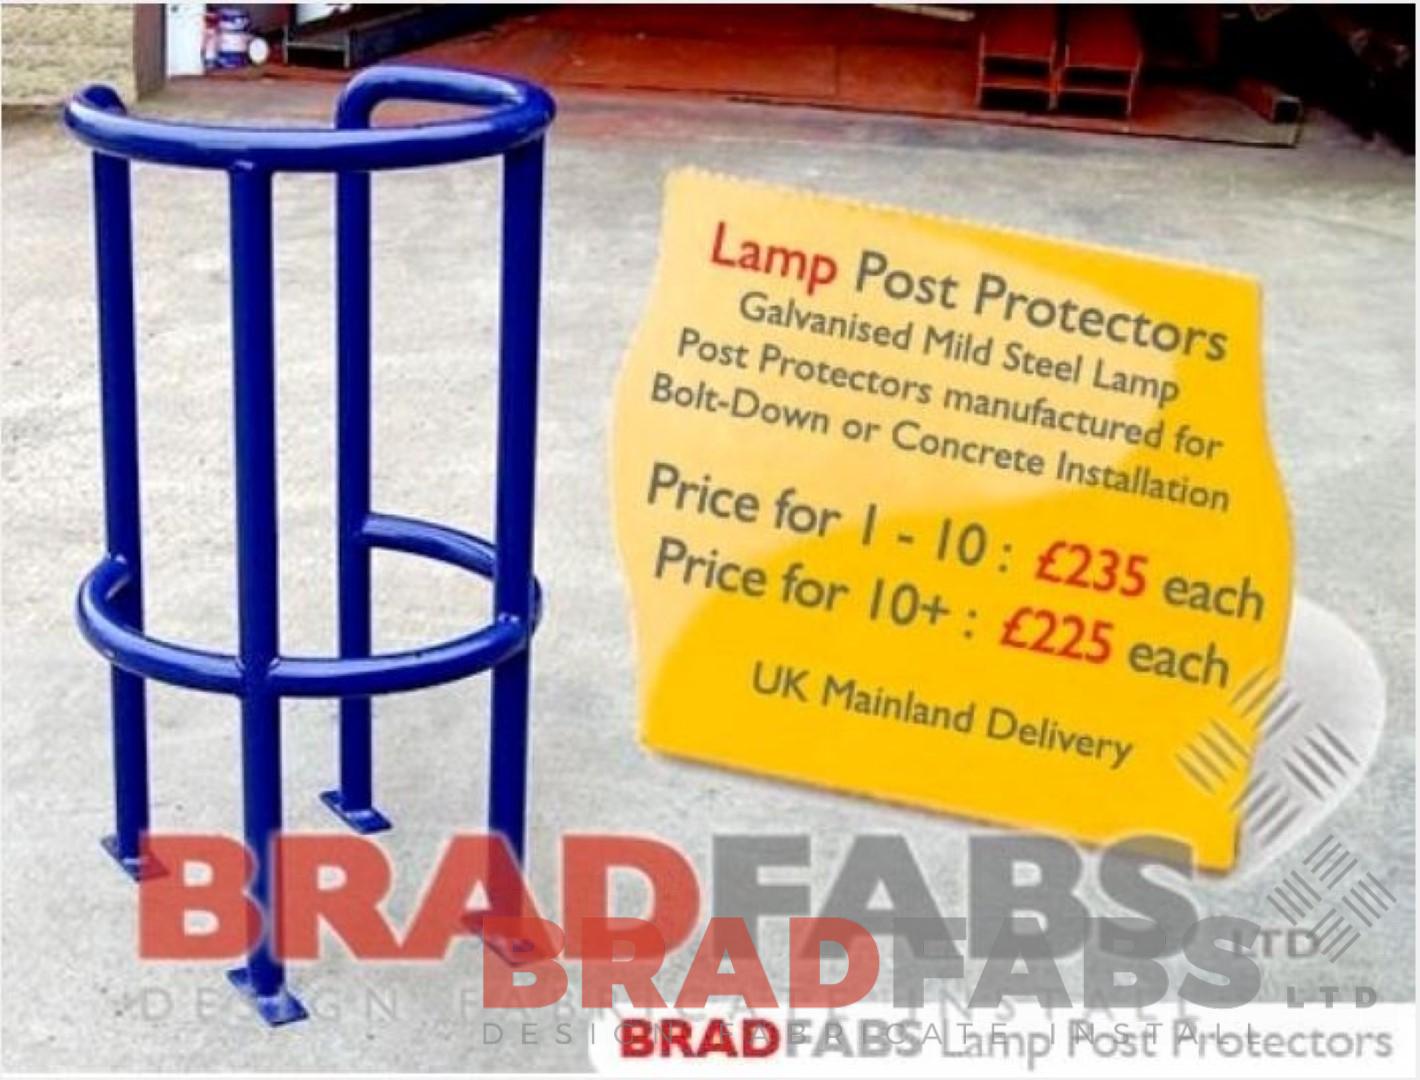 lamp post protector fabricated by bradfabs in england